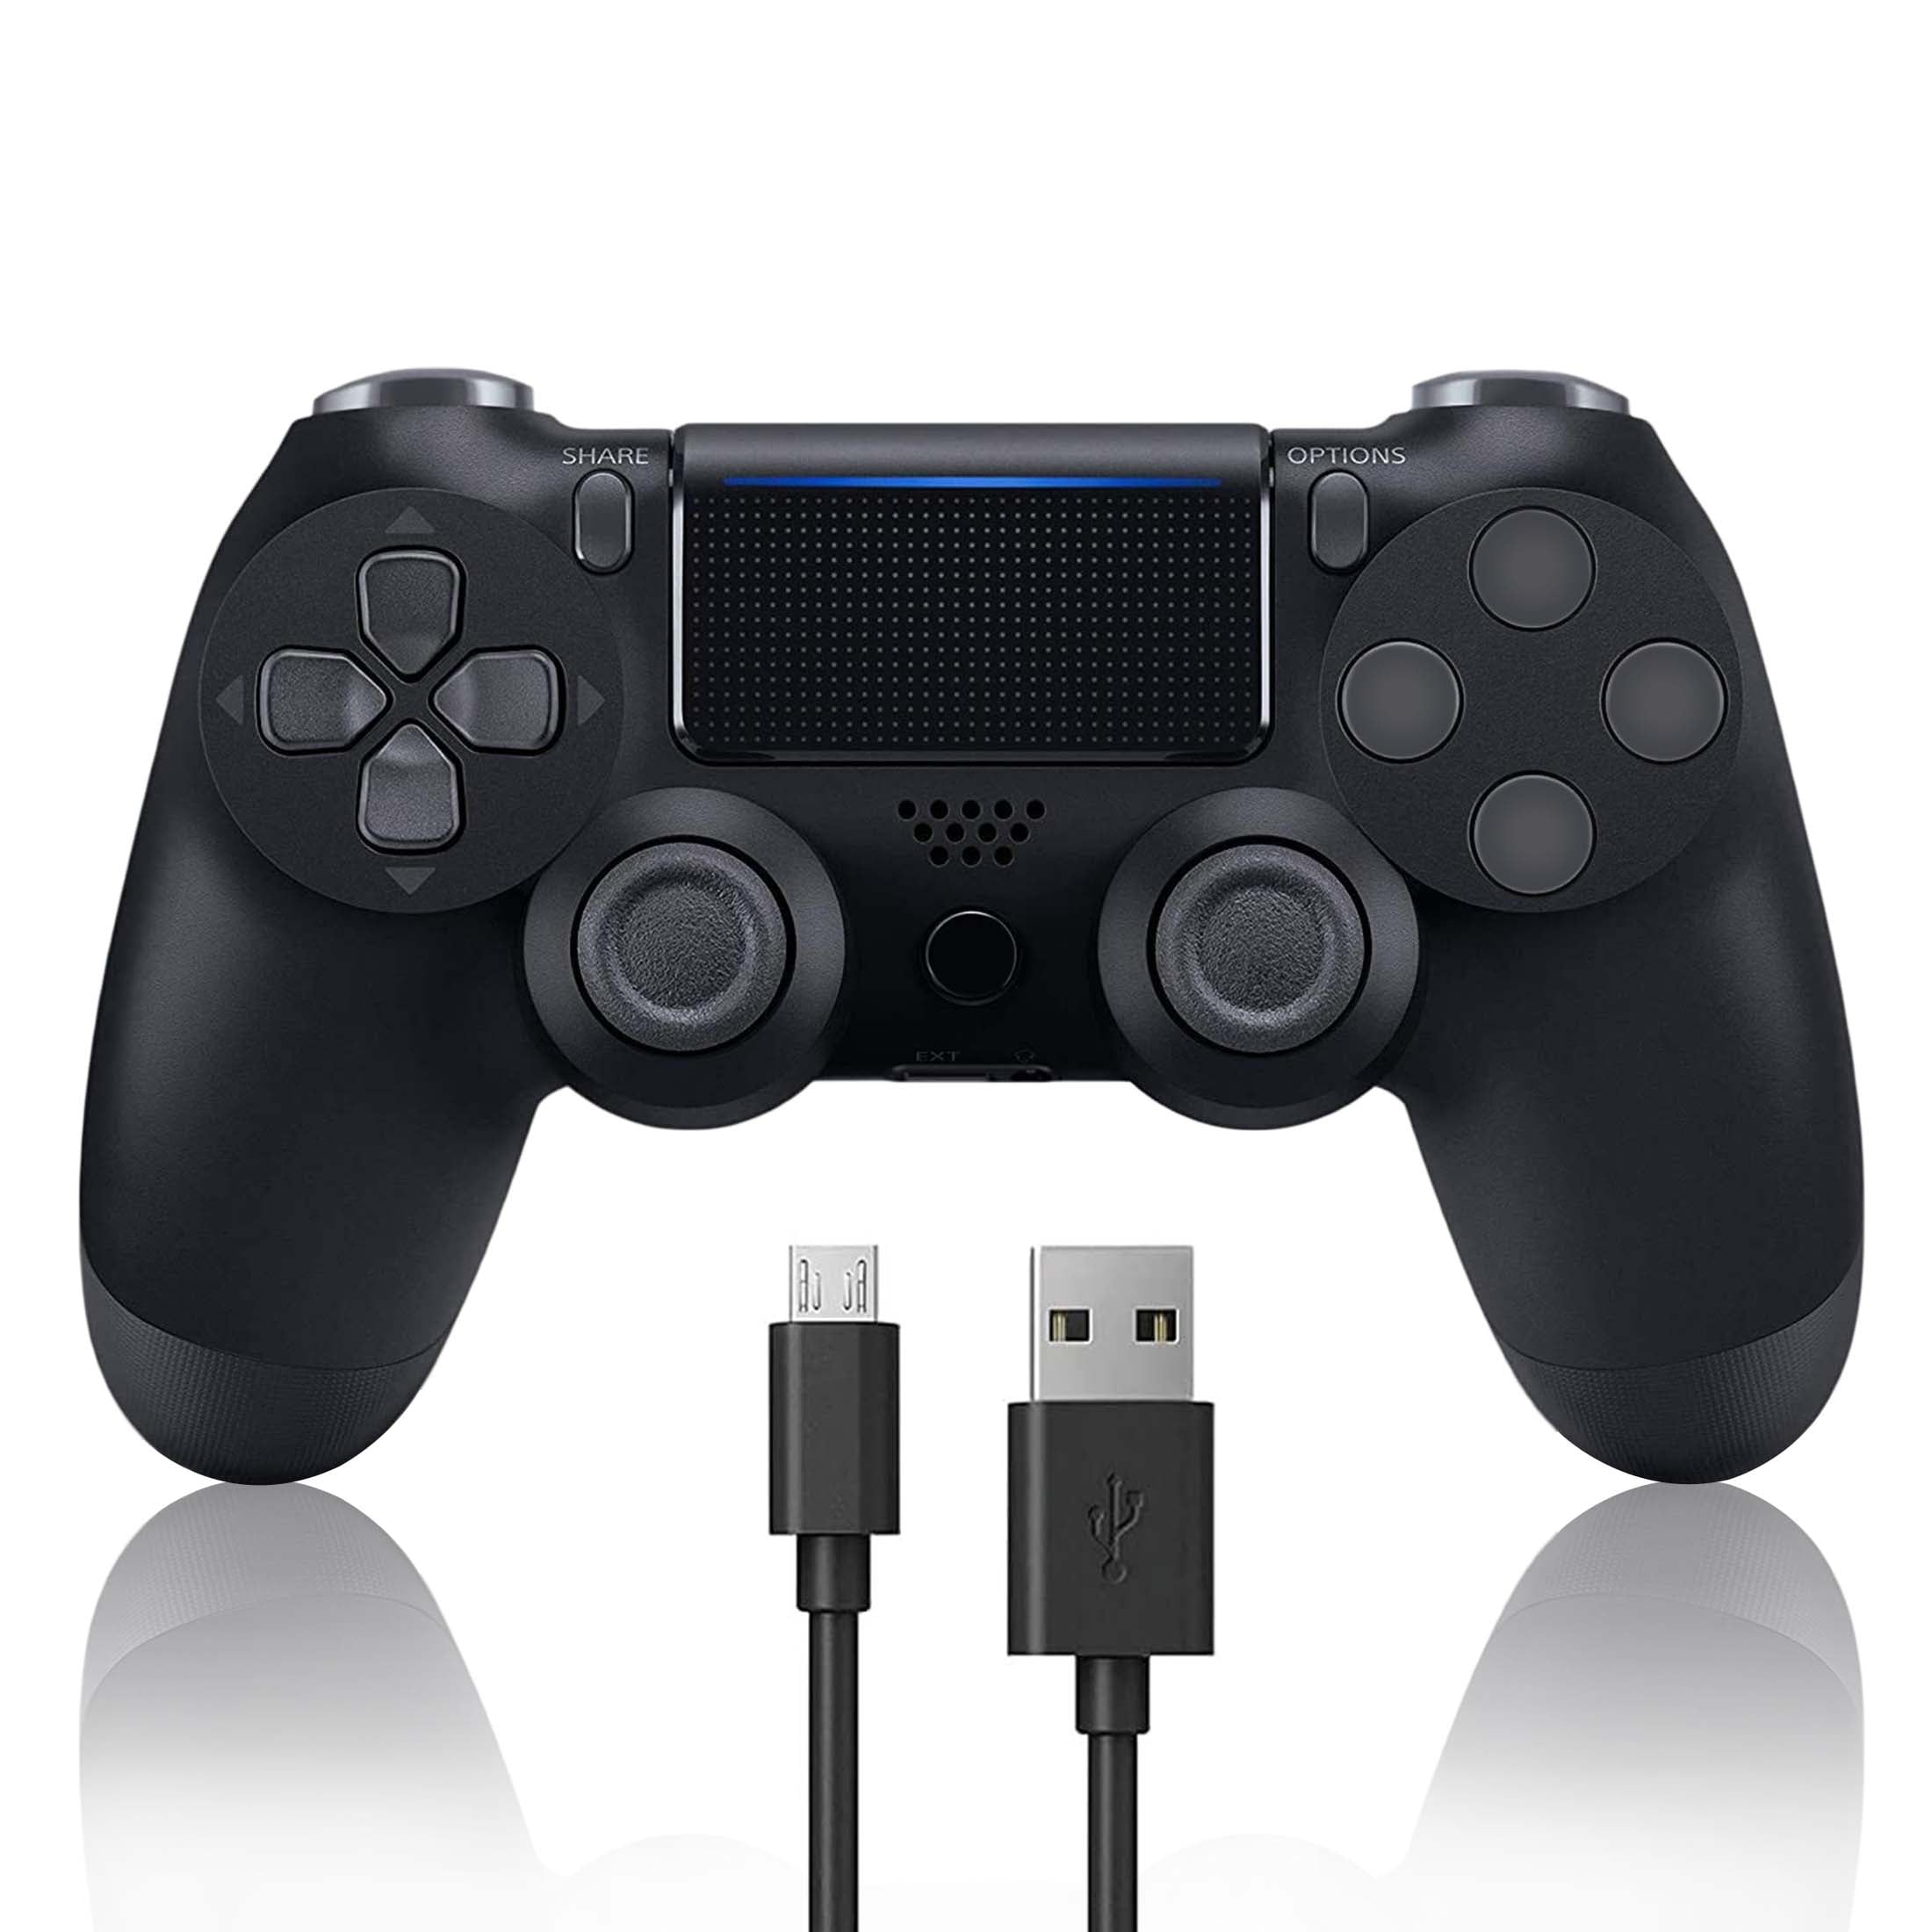 Wednesday tank agency DualShock 4 Wireless Controller for PlayStation 4, Rose Gold - Walmart.com